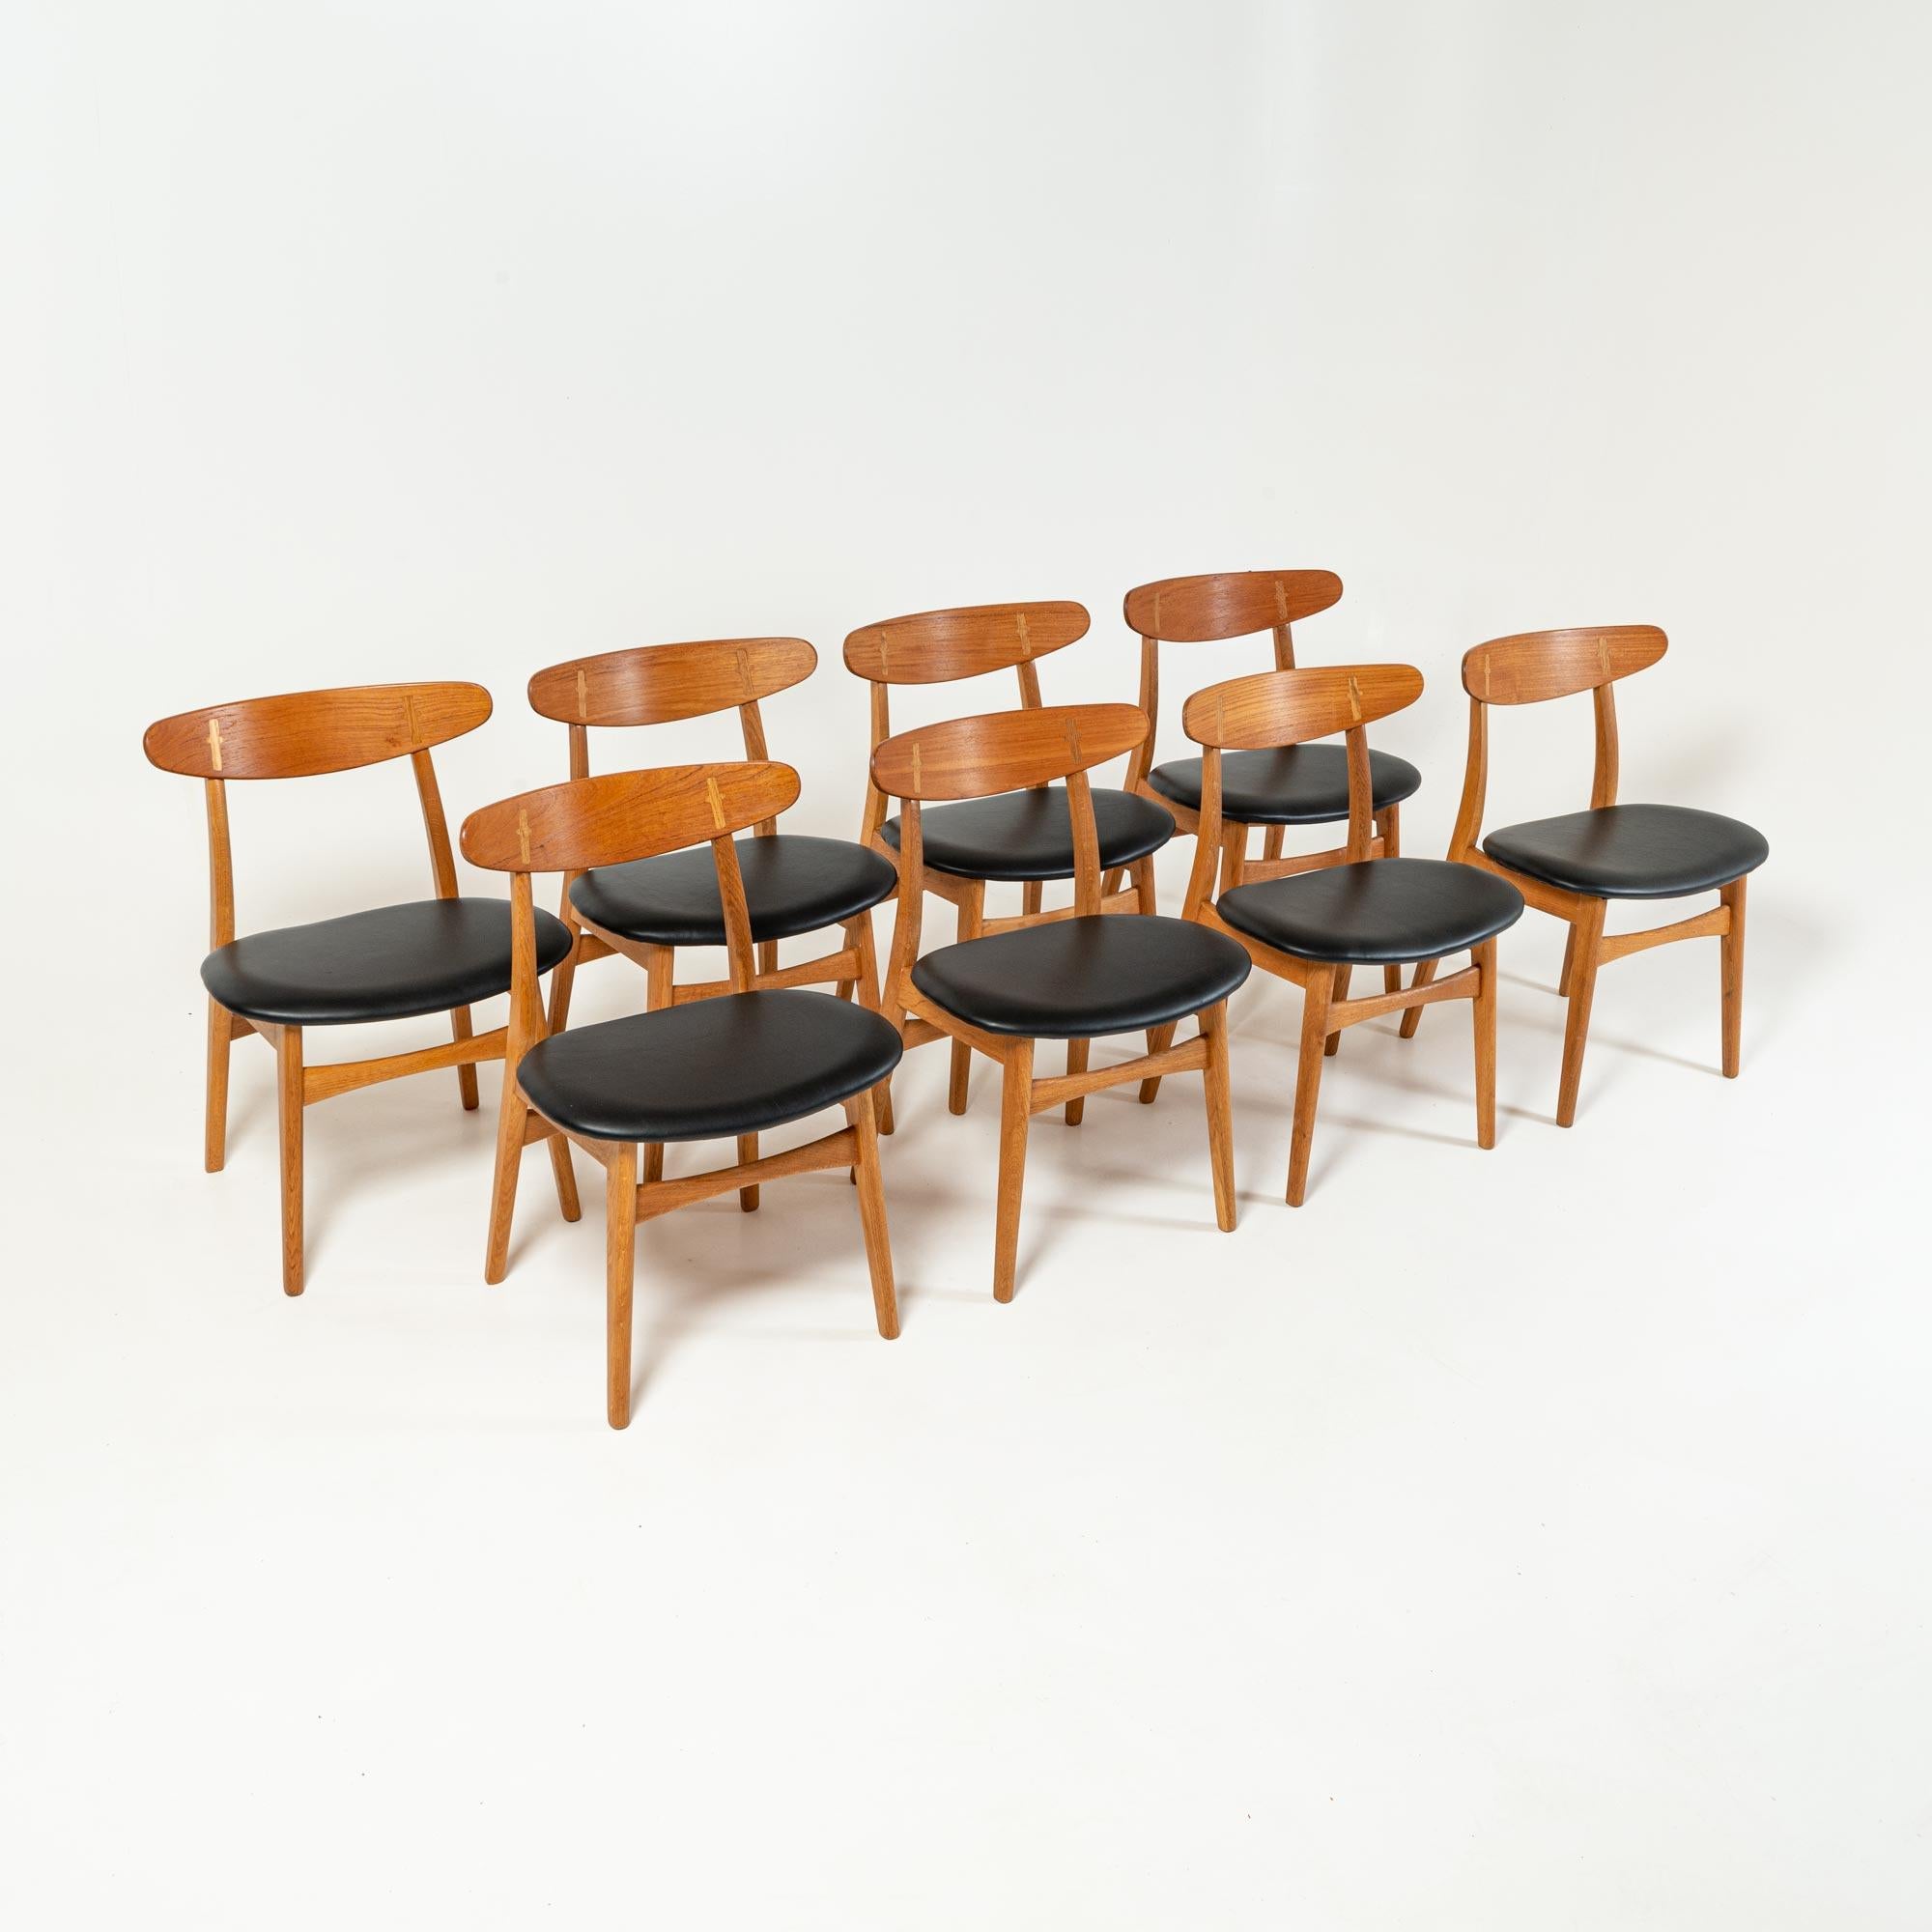 Mid-Century Modern CH30 Dining Chairs by Hans Wegner for Carl Hansen & Son in Oak, Teak and Leather